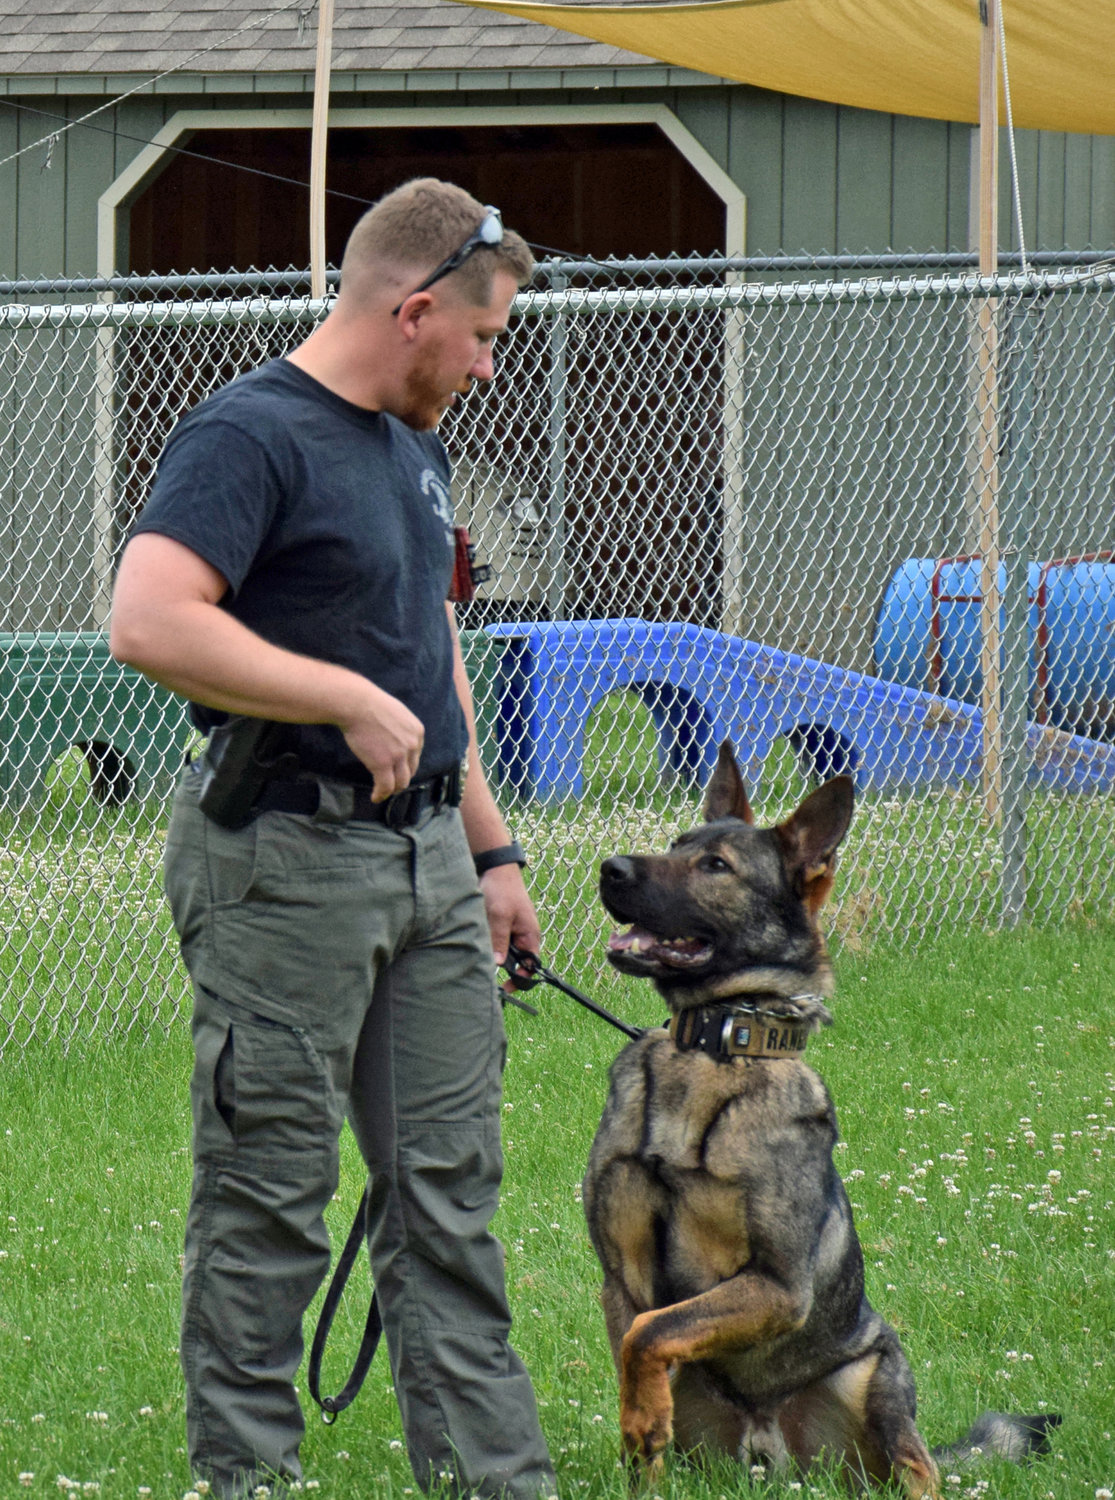 Officer Tyler Fahringer of the Quakertown K-9 Unit conducts a demonstration with K-9 Ranger.